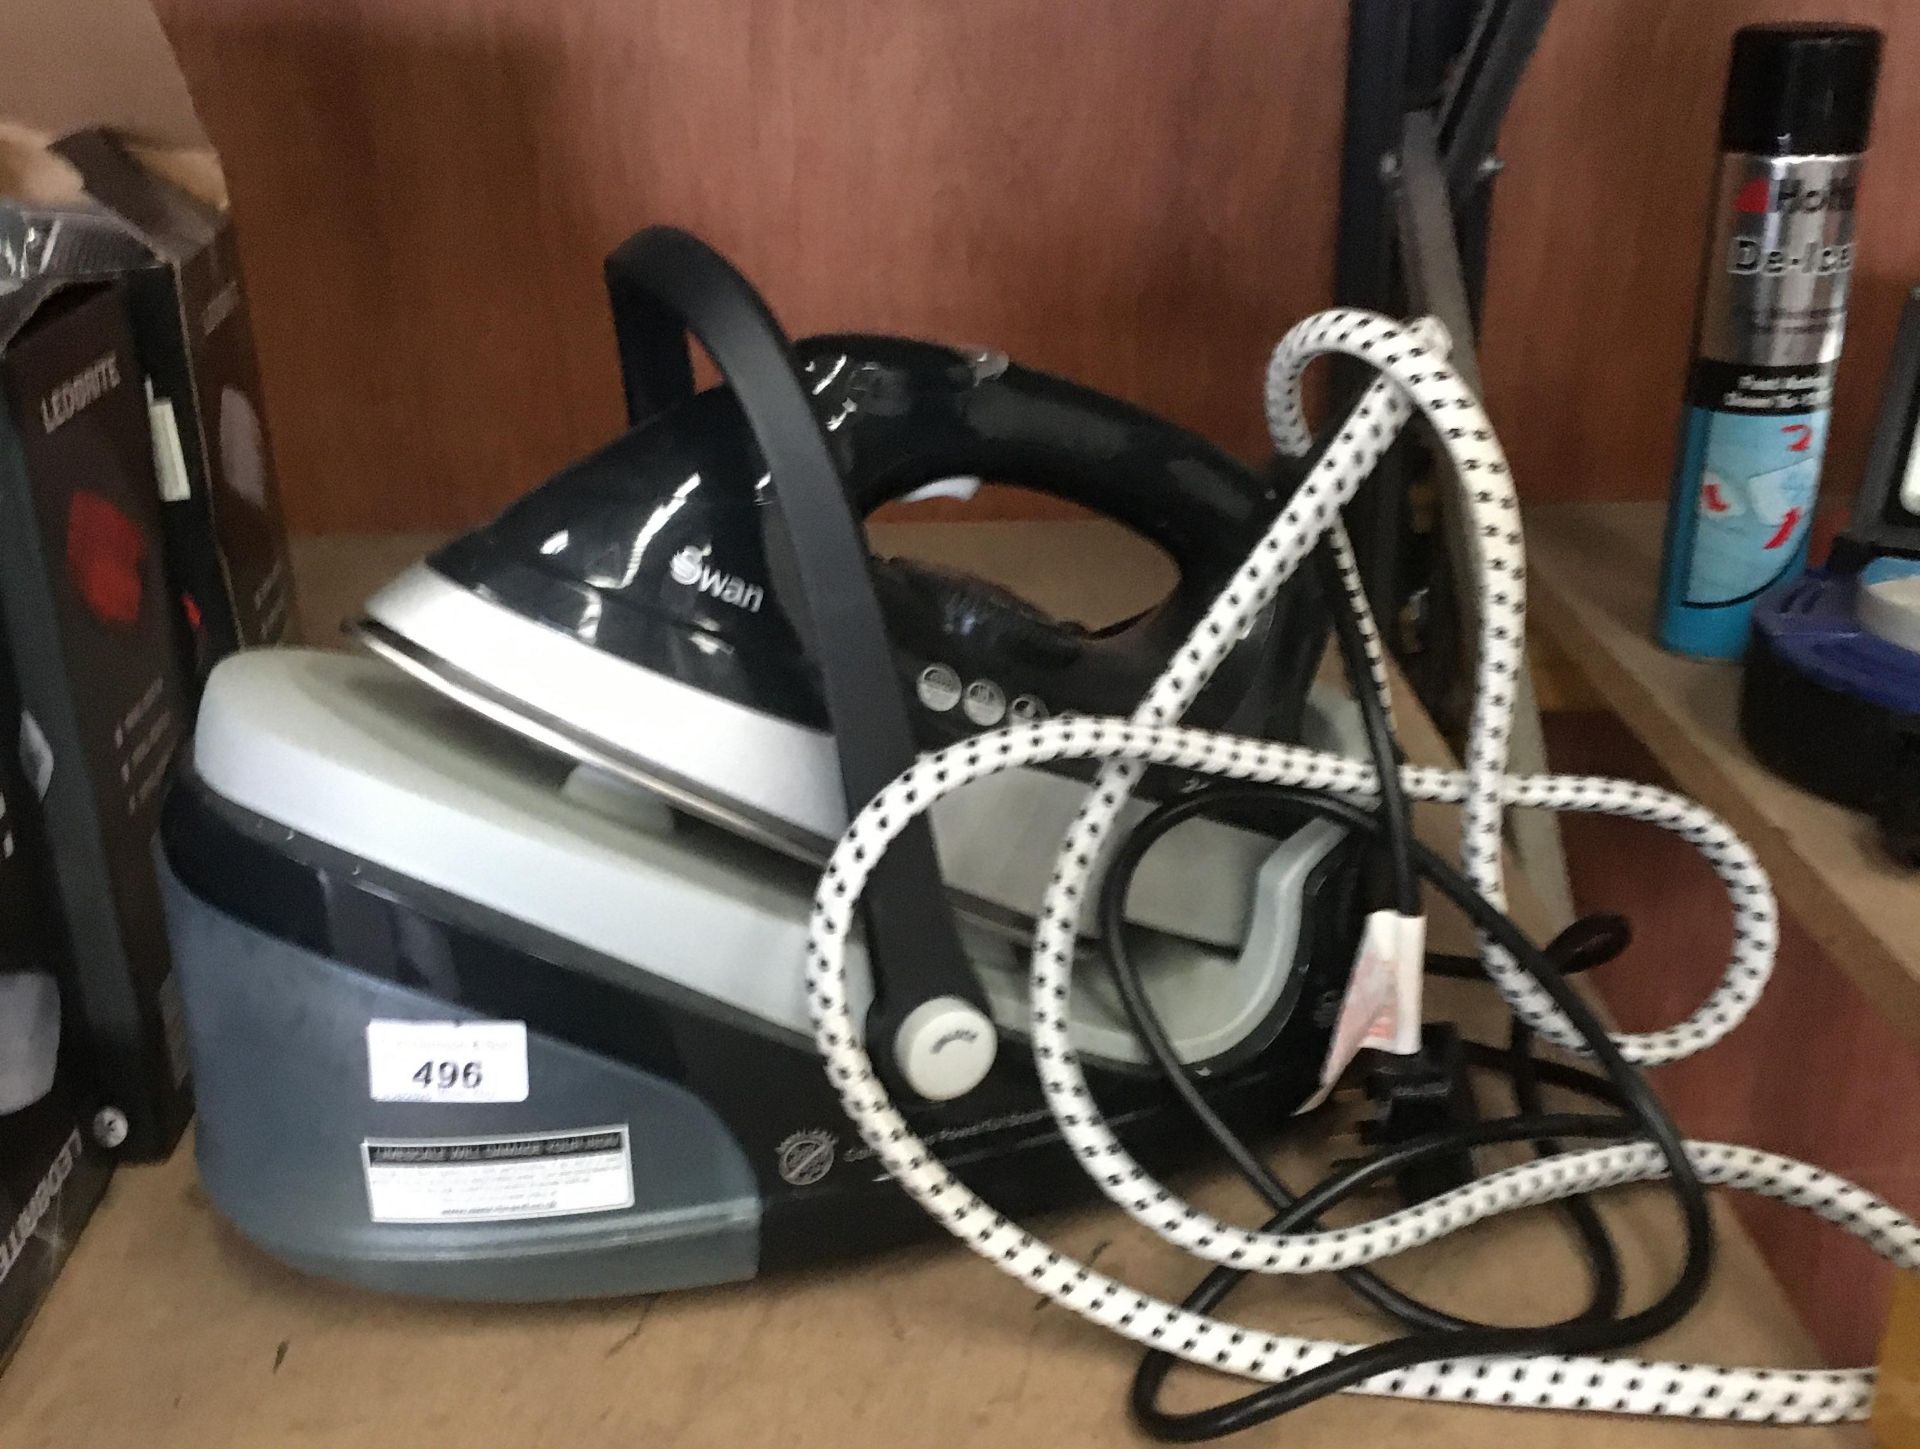 A Swan continuous powerful steam iron,